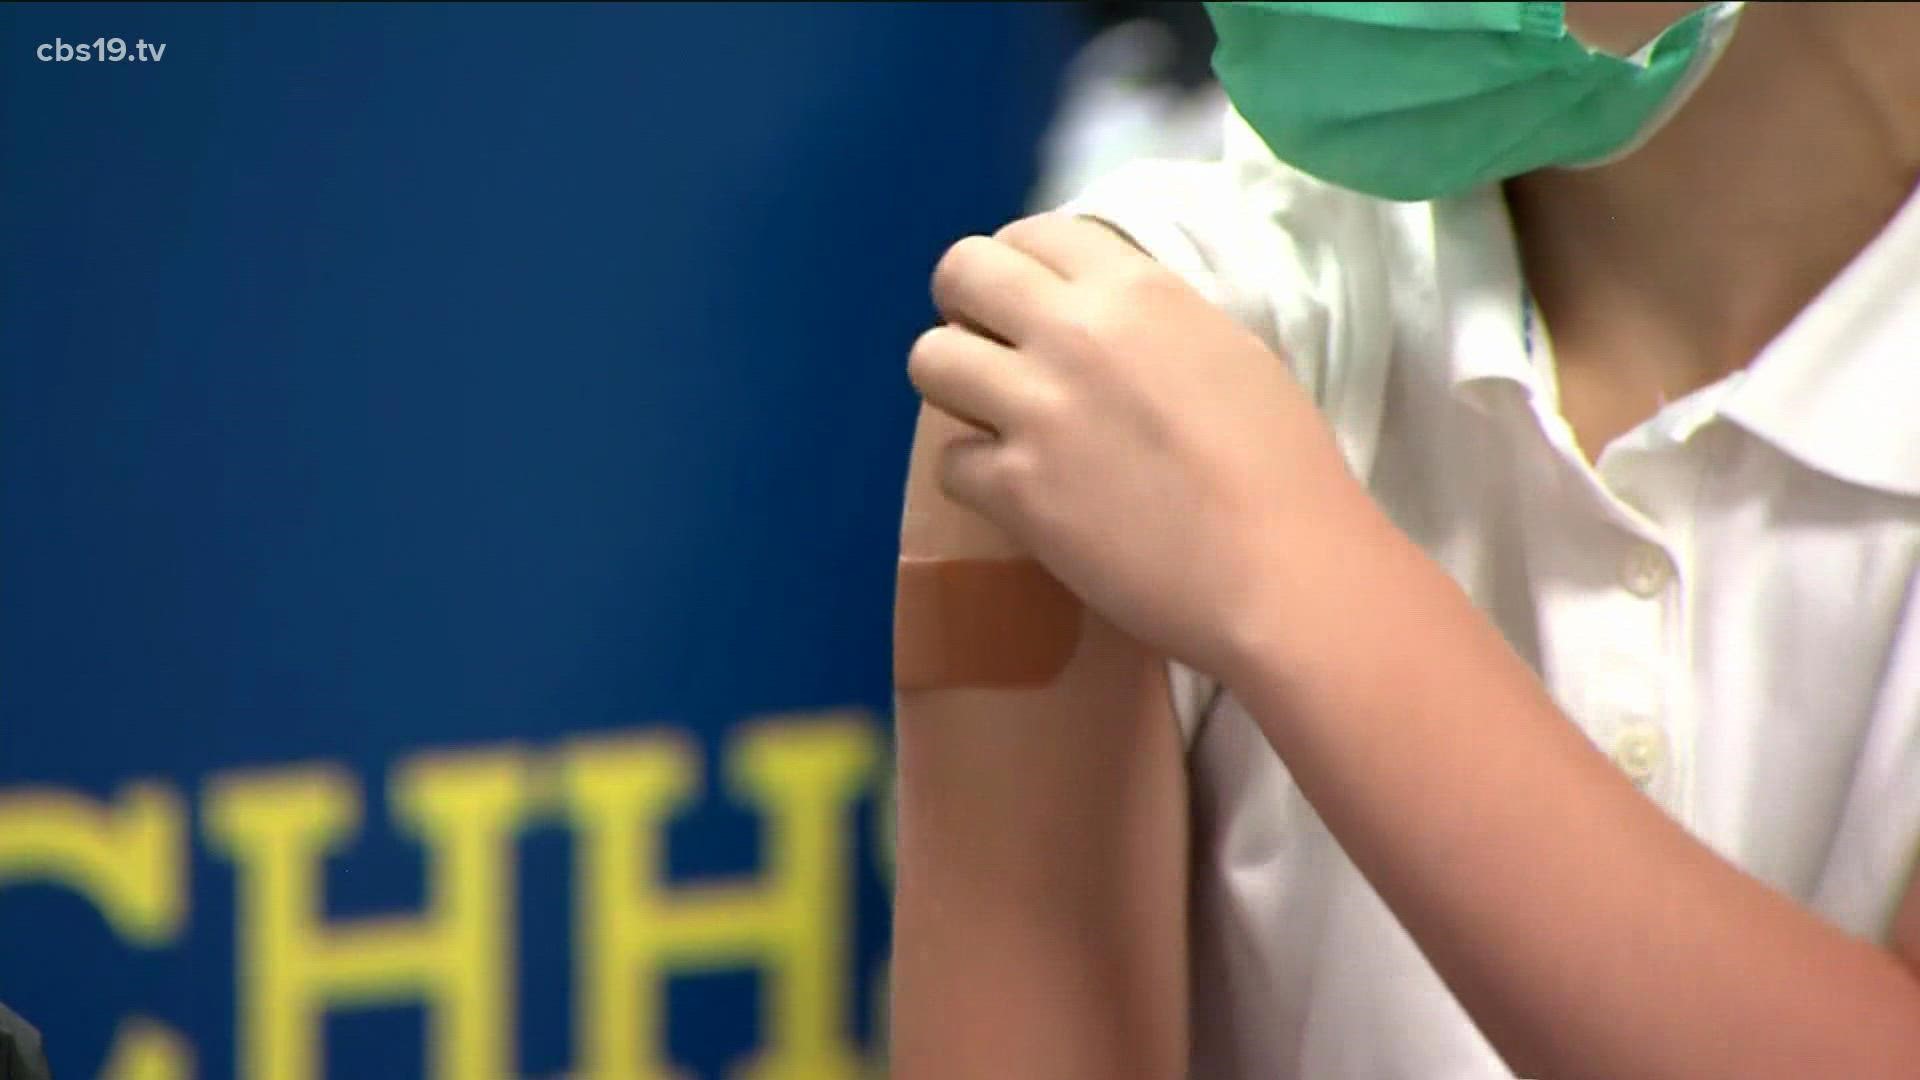 With the vaccines now approved for ages 5-11, some parents are even more reluctant to get their child vaccinated.